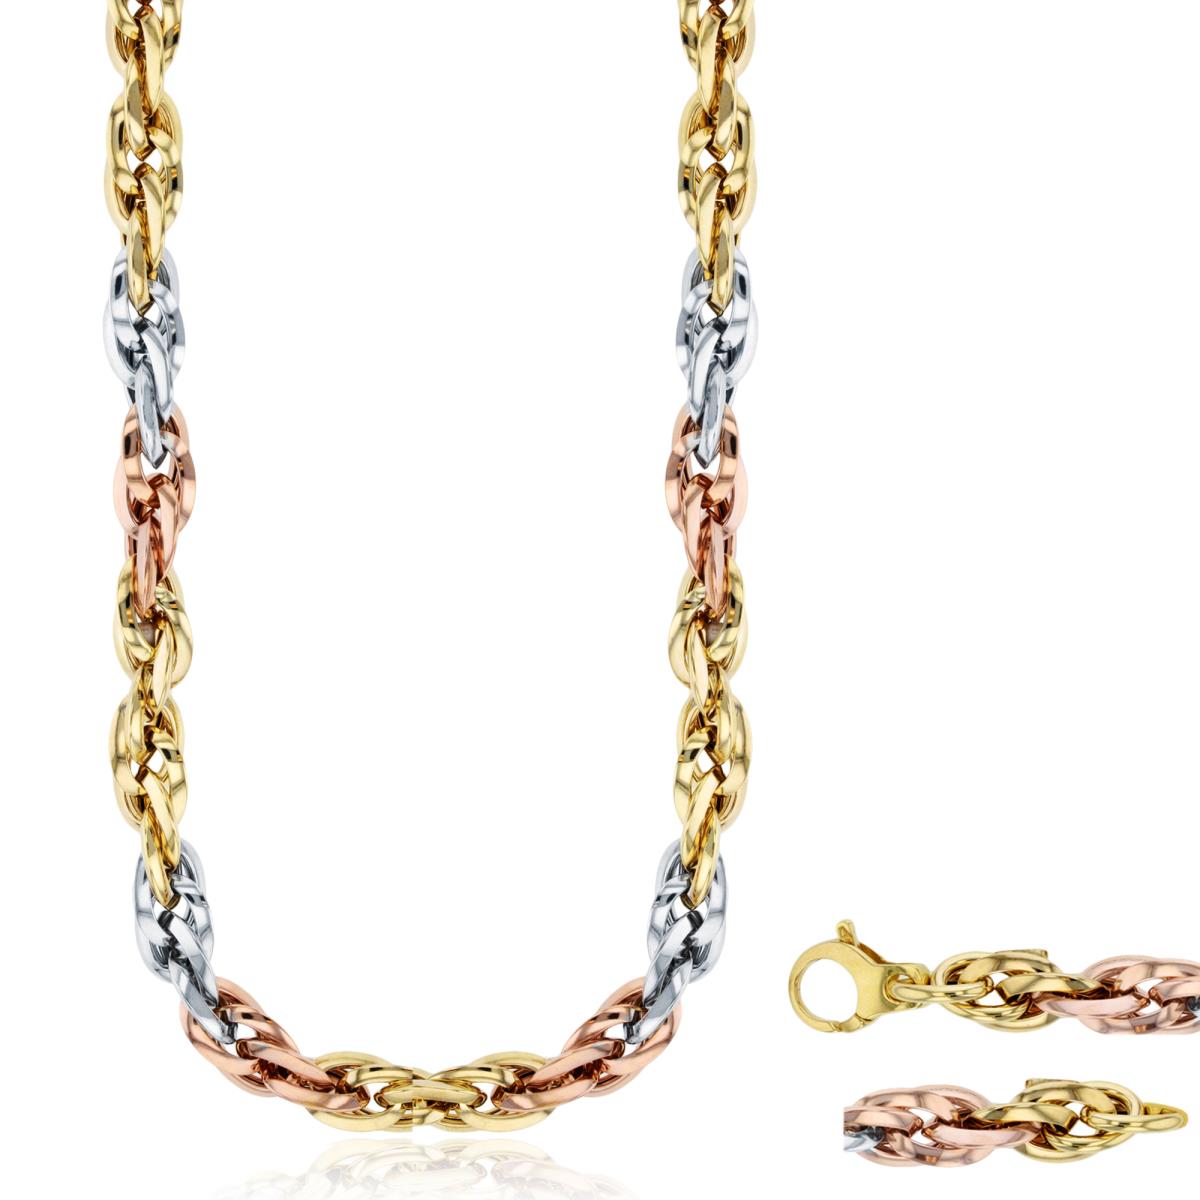 14K Tri-Color Gold 7mm Flat Links Rope 18" Chain